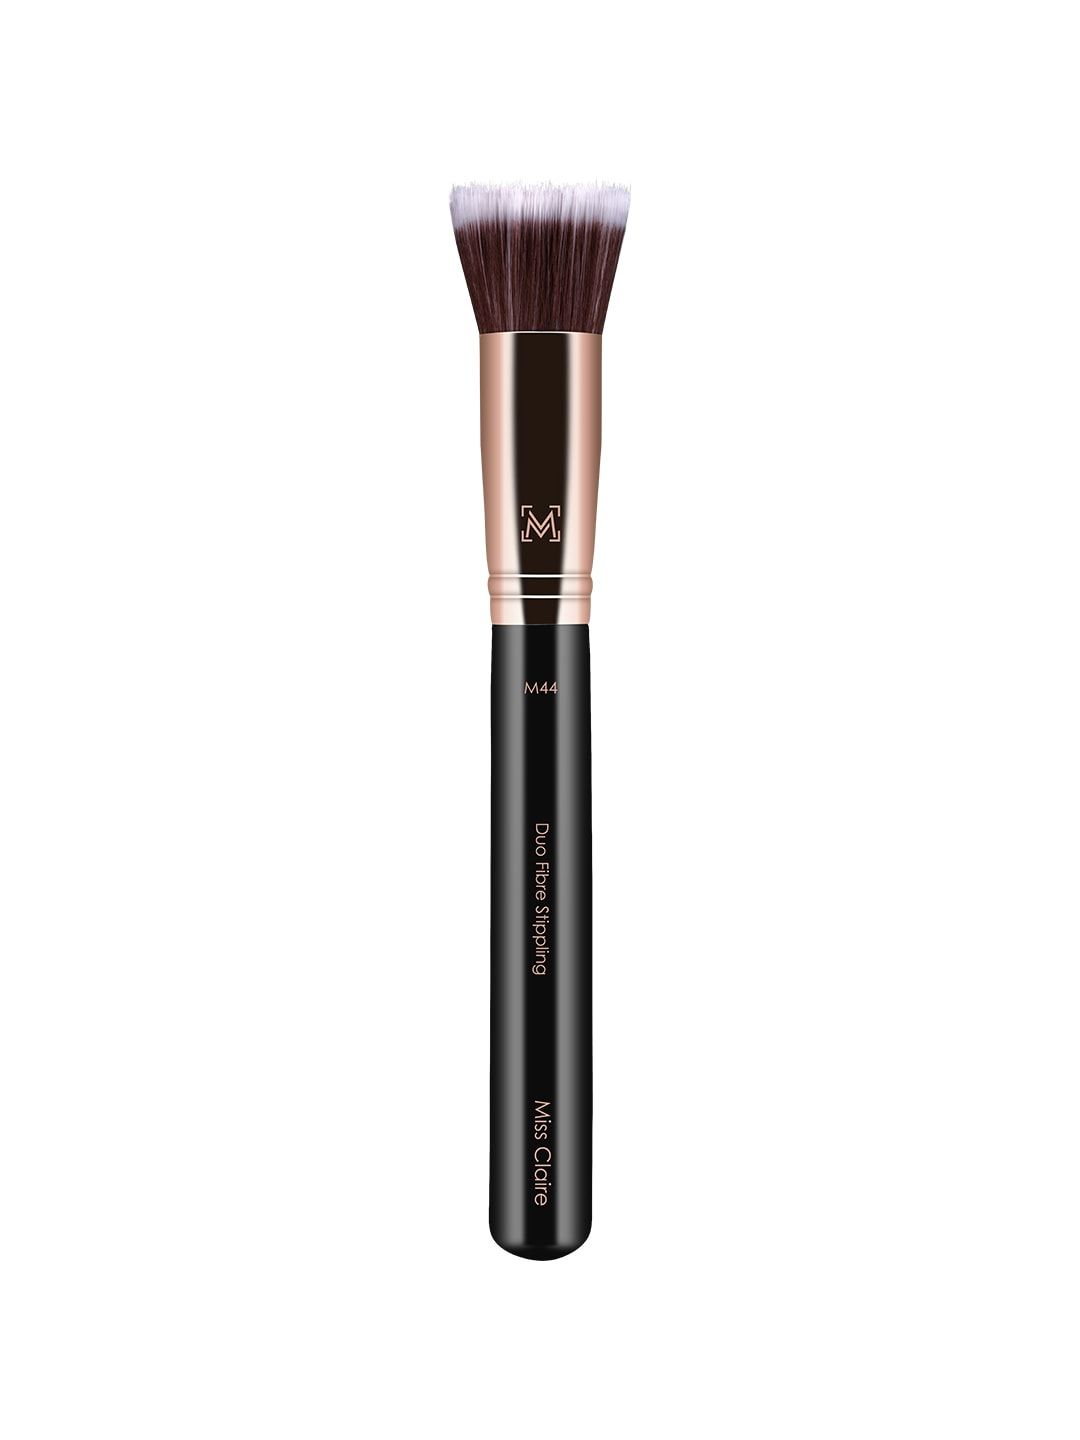 Miss Claire M44 - Duo Fibre Stippling Brush - Rose Gold-Toned & Black Price in India